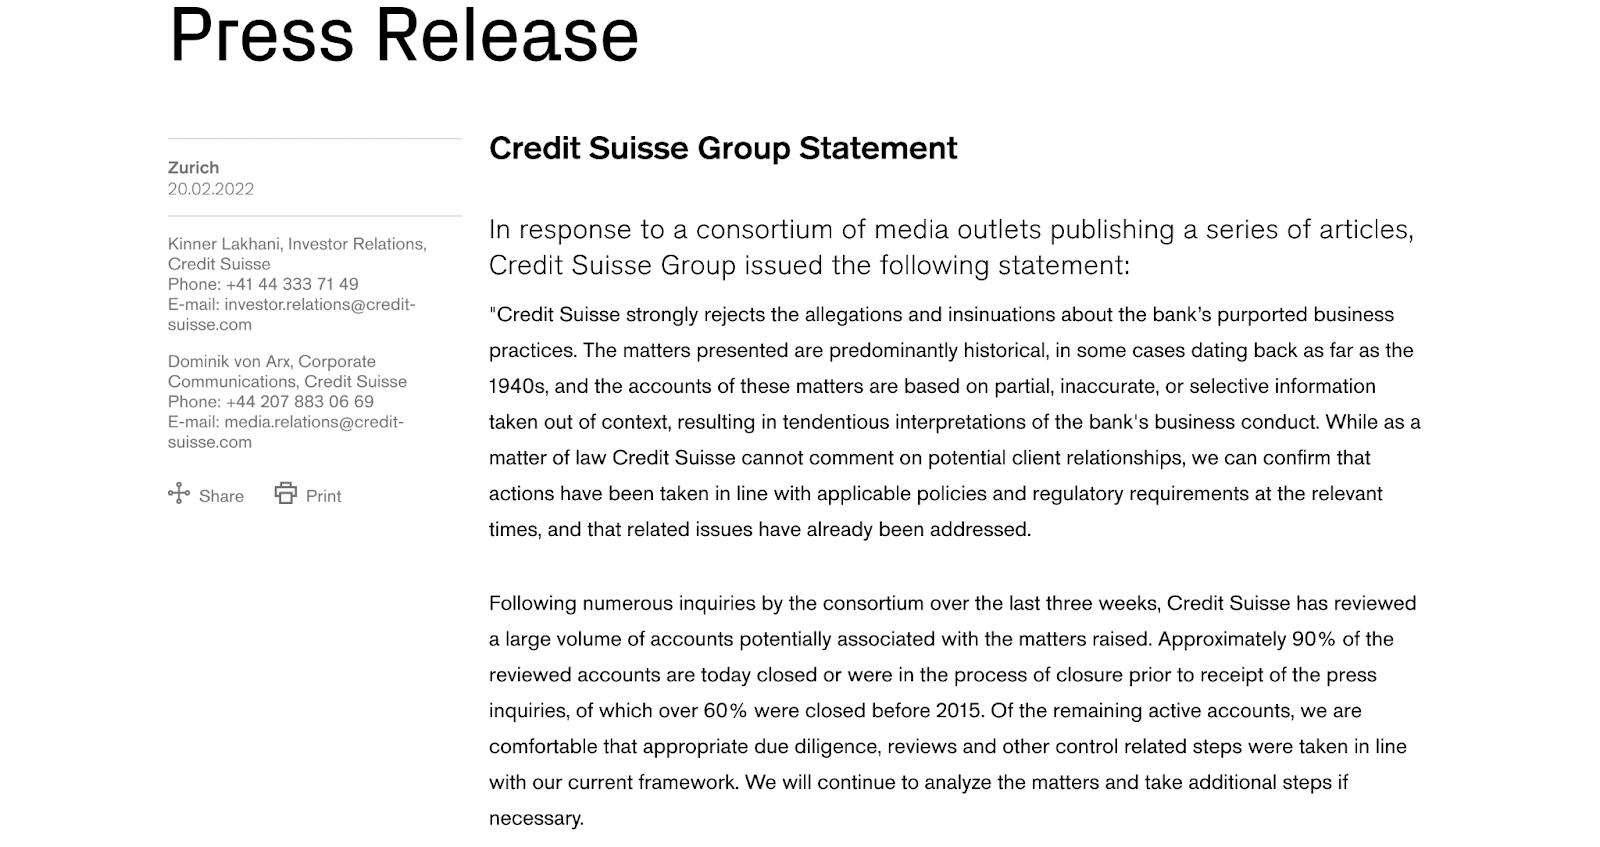 The Credit Suisse press release following the data breach